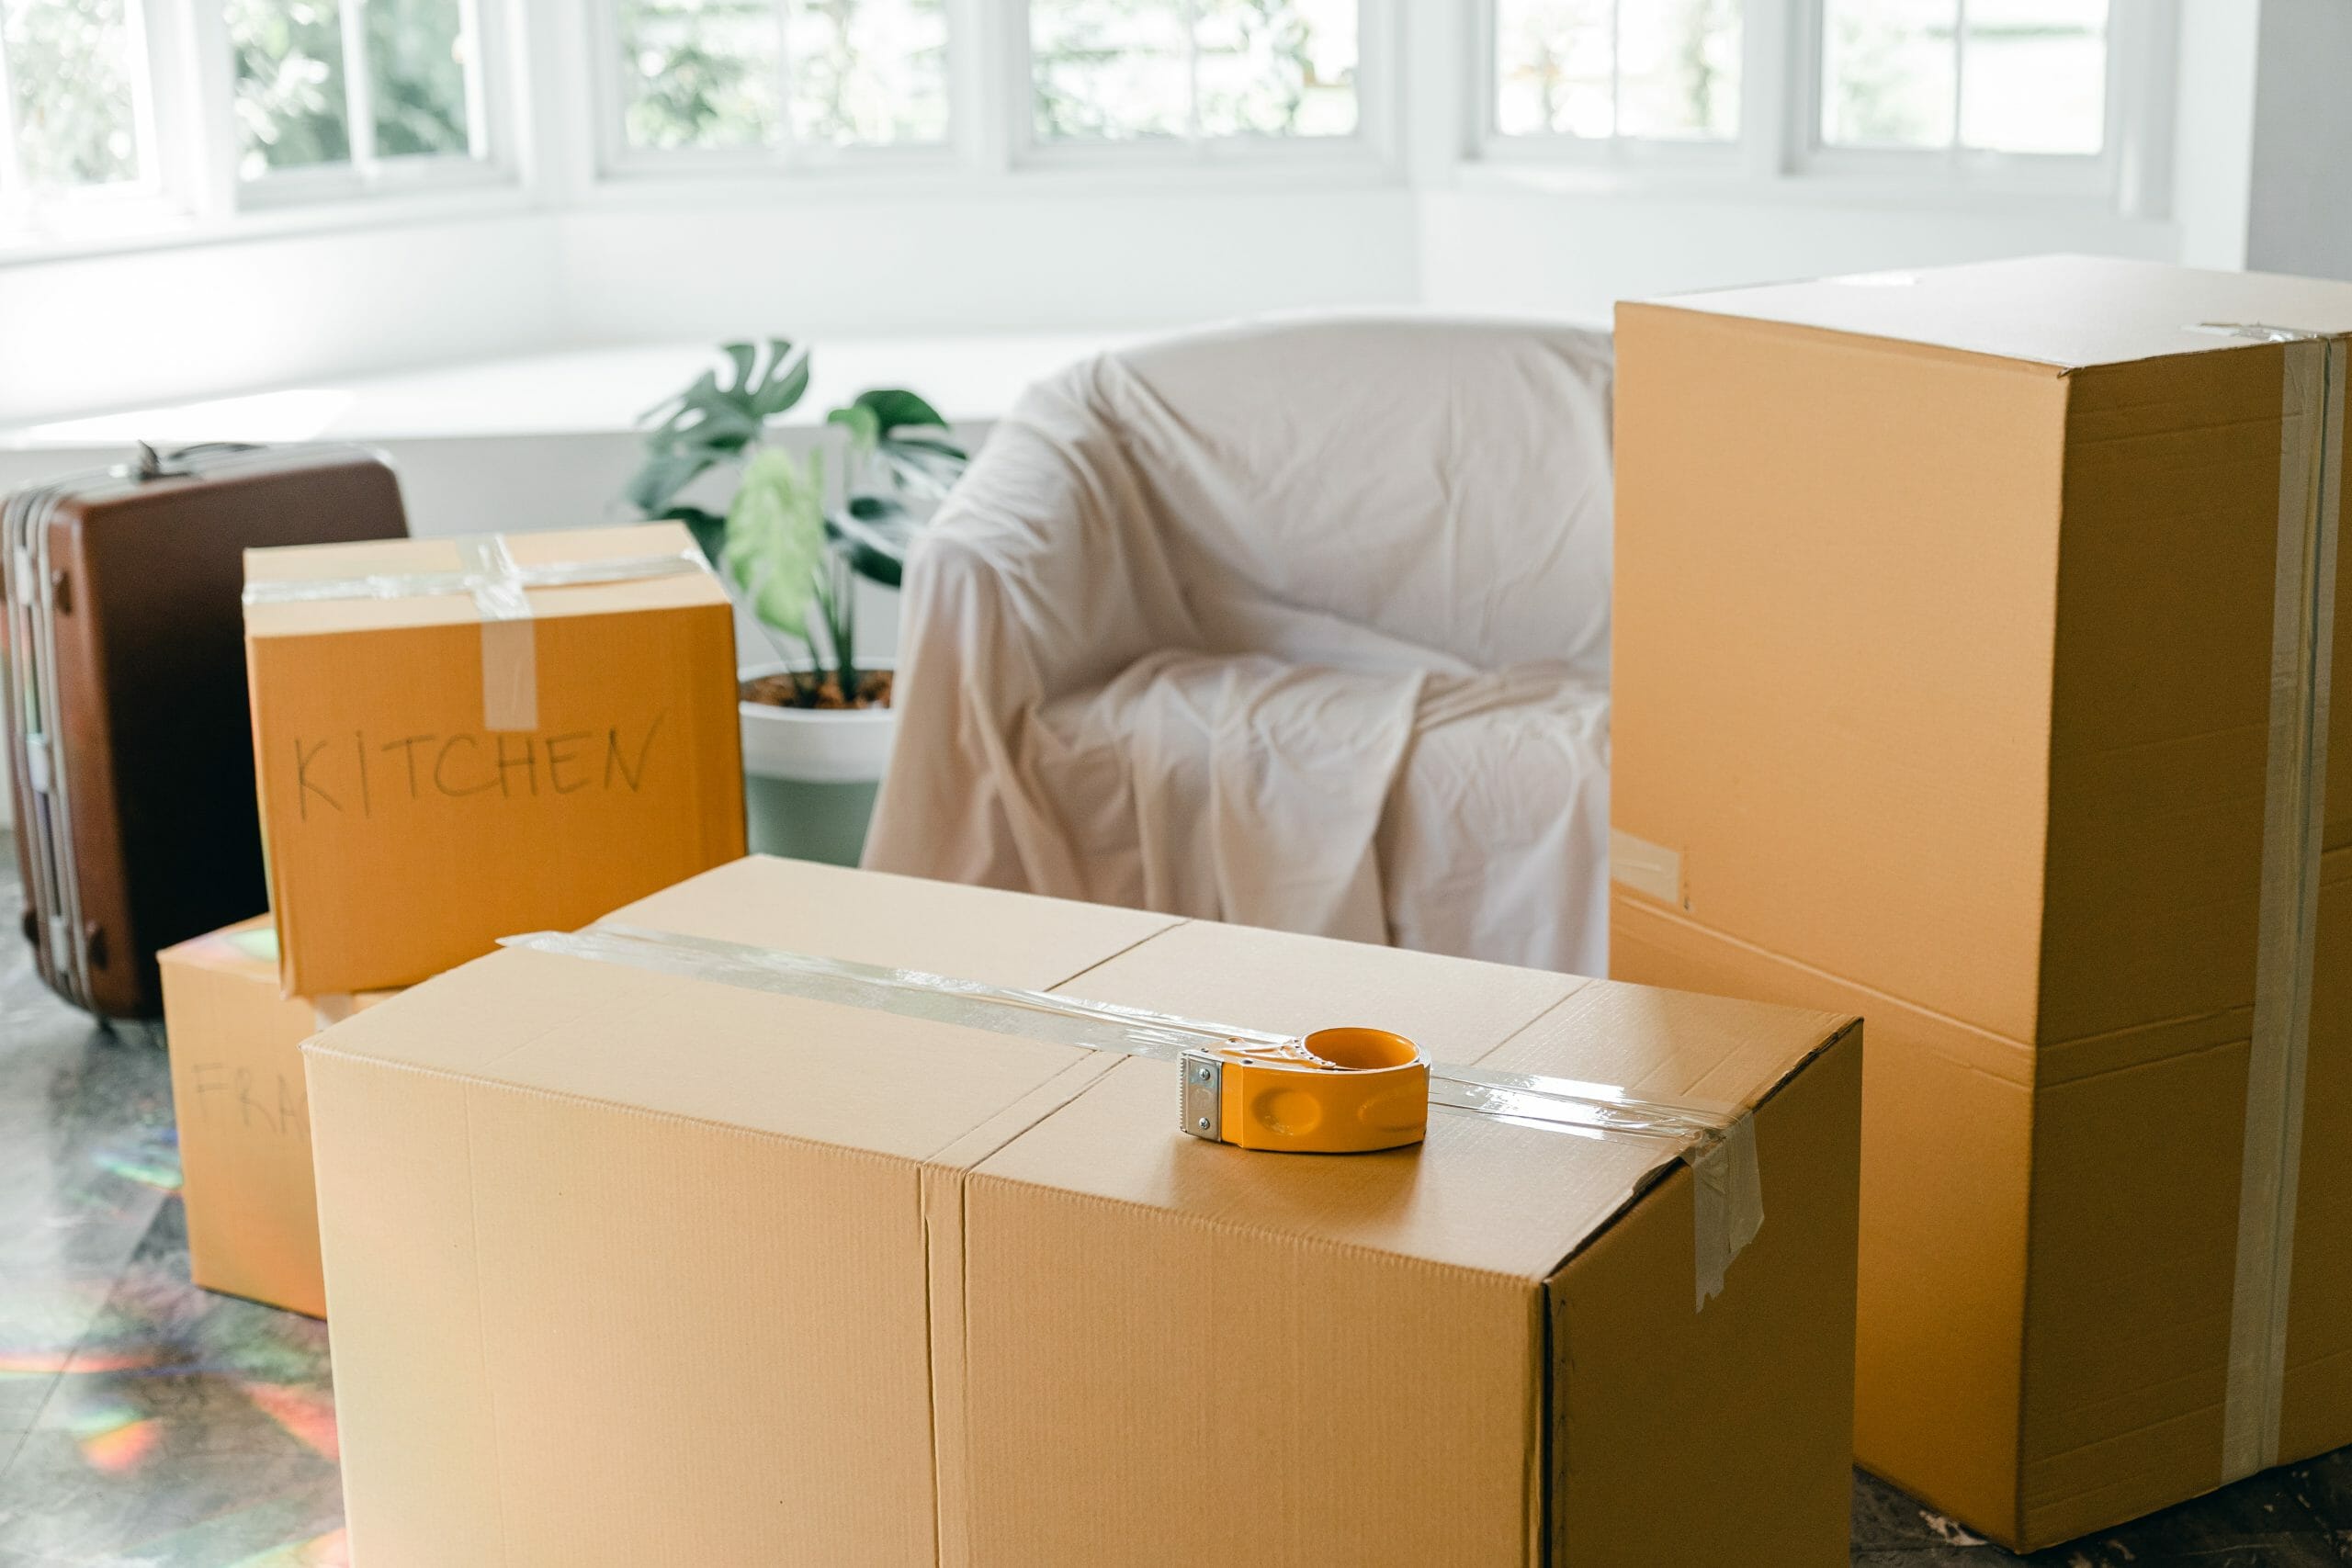 9 Important Things To Do When Moving Into a New Home